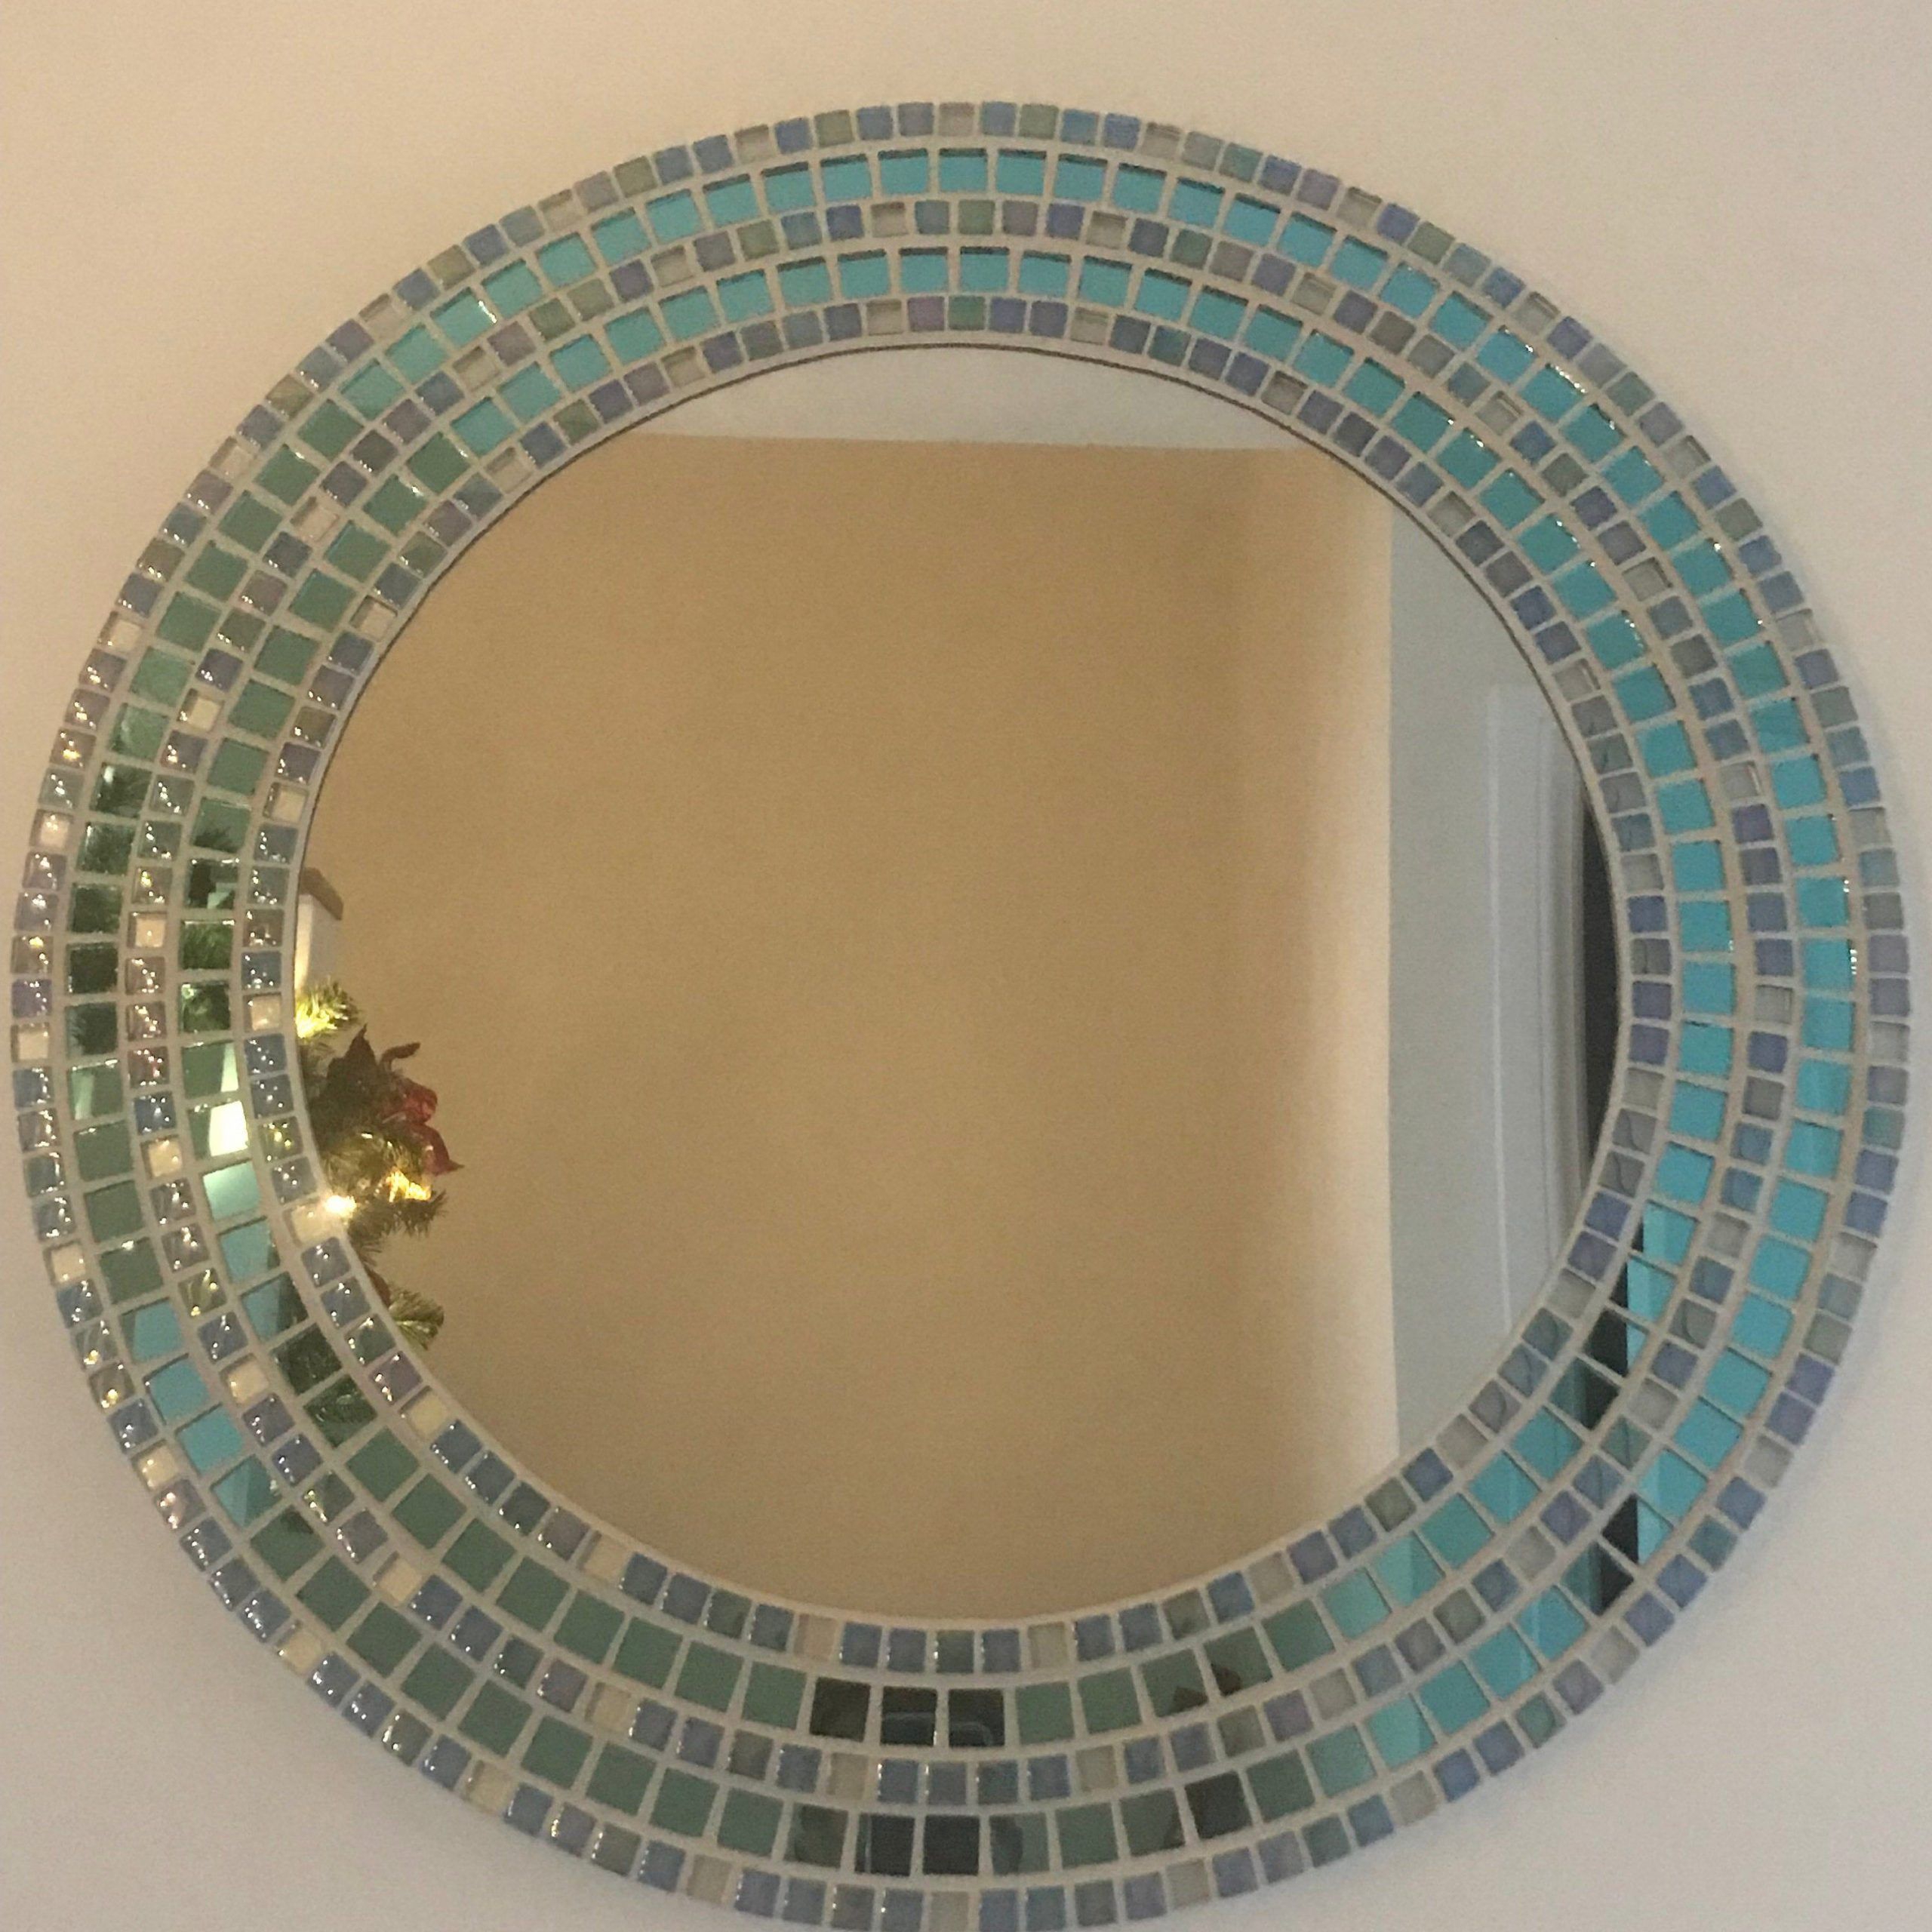 Beautiful Handmade Mosaic Mirror Bevelled Edge Glass Gold | Etsy Intended For Rounded Cut Edge Wall Mirrors (View 2 of 15)